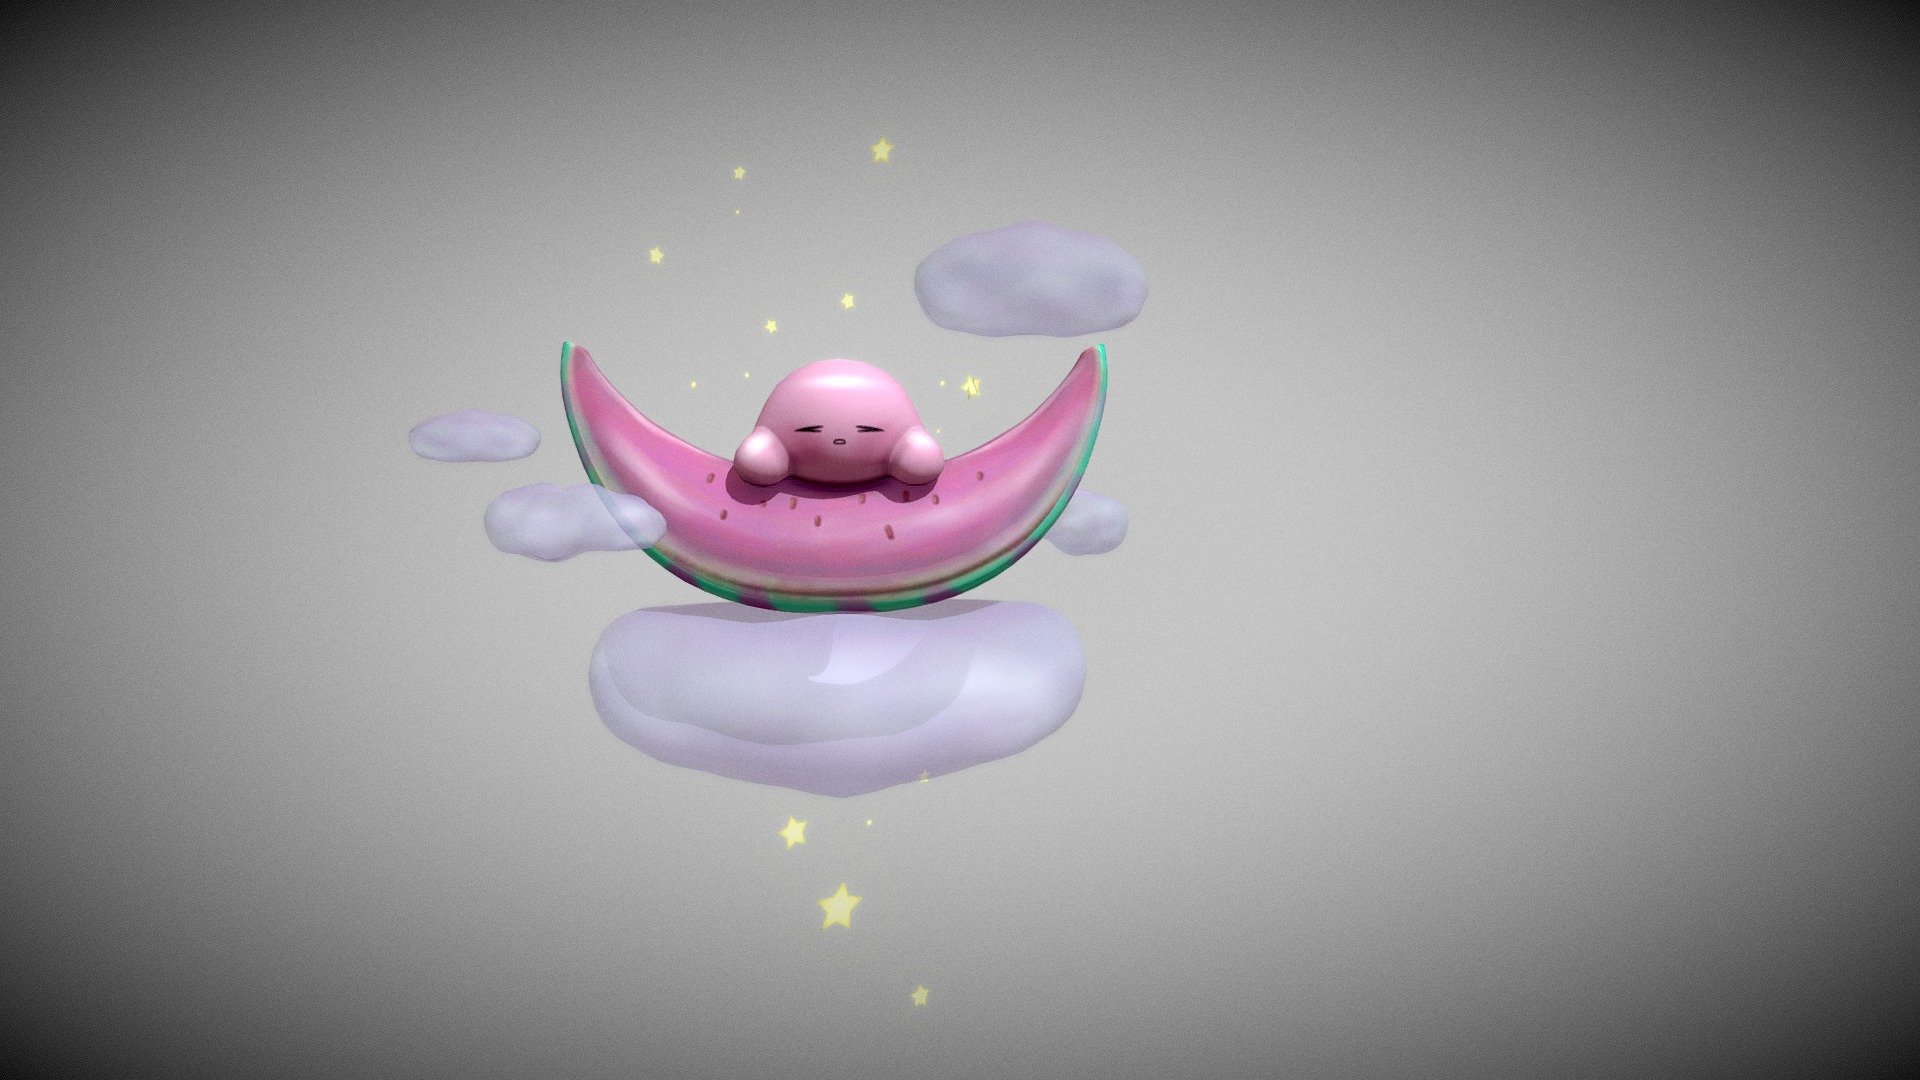 Found this beautiful 2D art by HAPPE (@hap_pe on Twitter) 🌸 Had lot's of fun making a simple 3D version of it ^^ (also had some interesting issues with something that really shouldn't be an issue, but it worked out in the end! 😅) - Kirby on a Watermelon slice (●'◡'●) - 3D model by BikaBoo 3d model